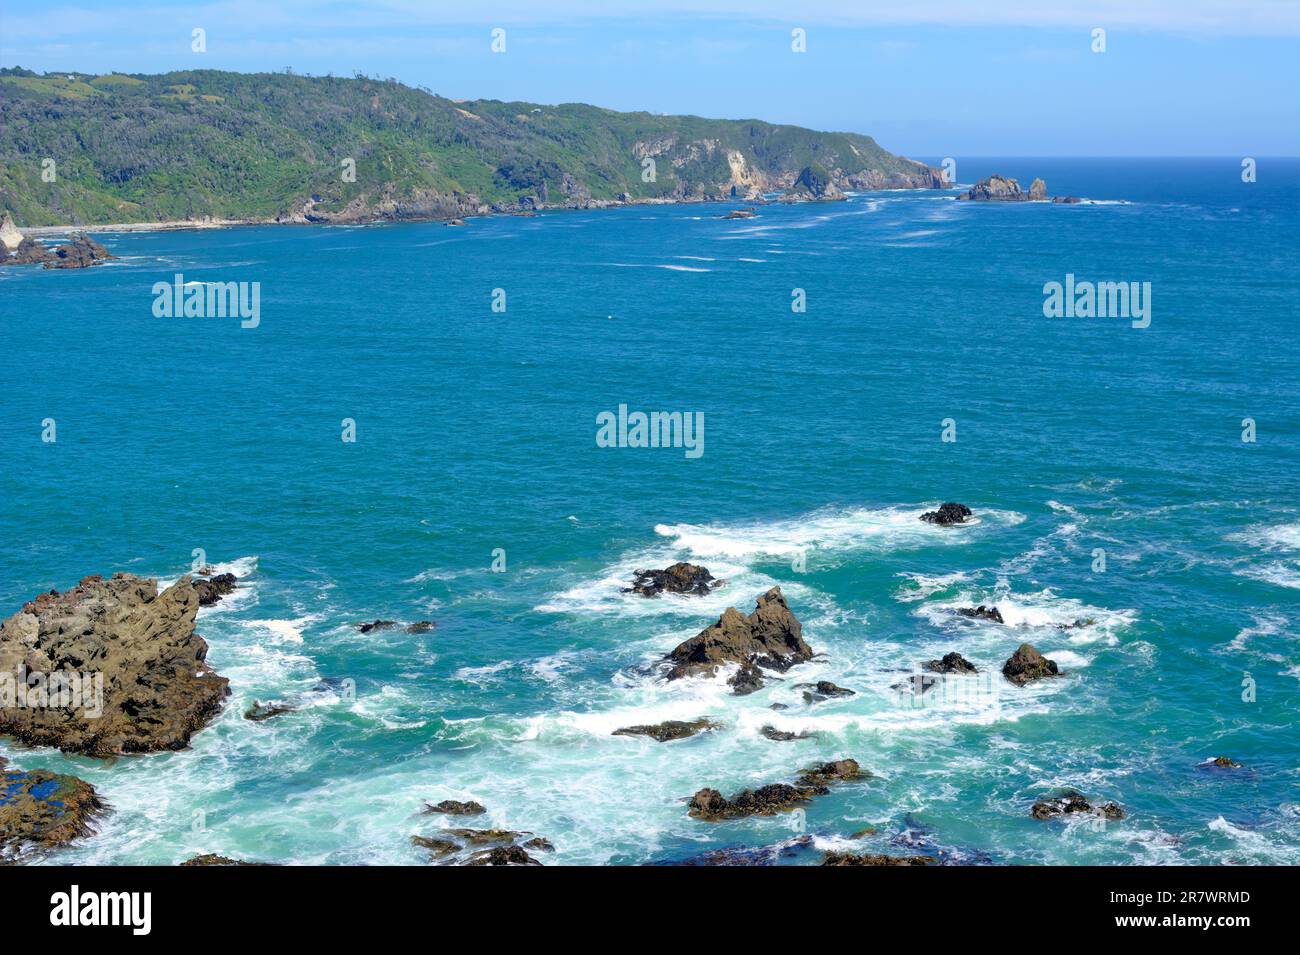 The ocean coast of the island of Chiloe in southern Chile. Stock Photo